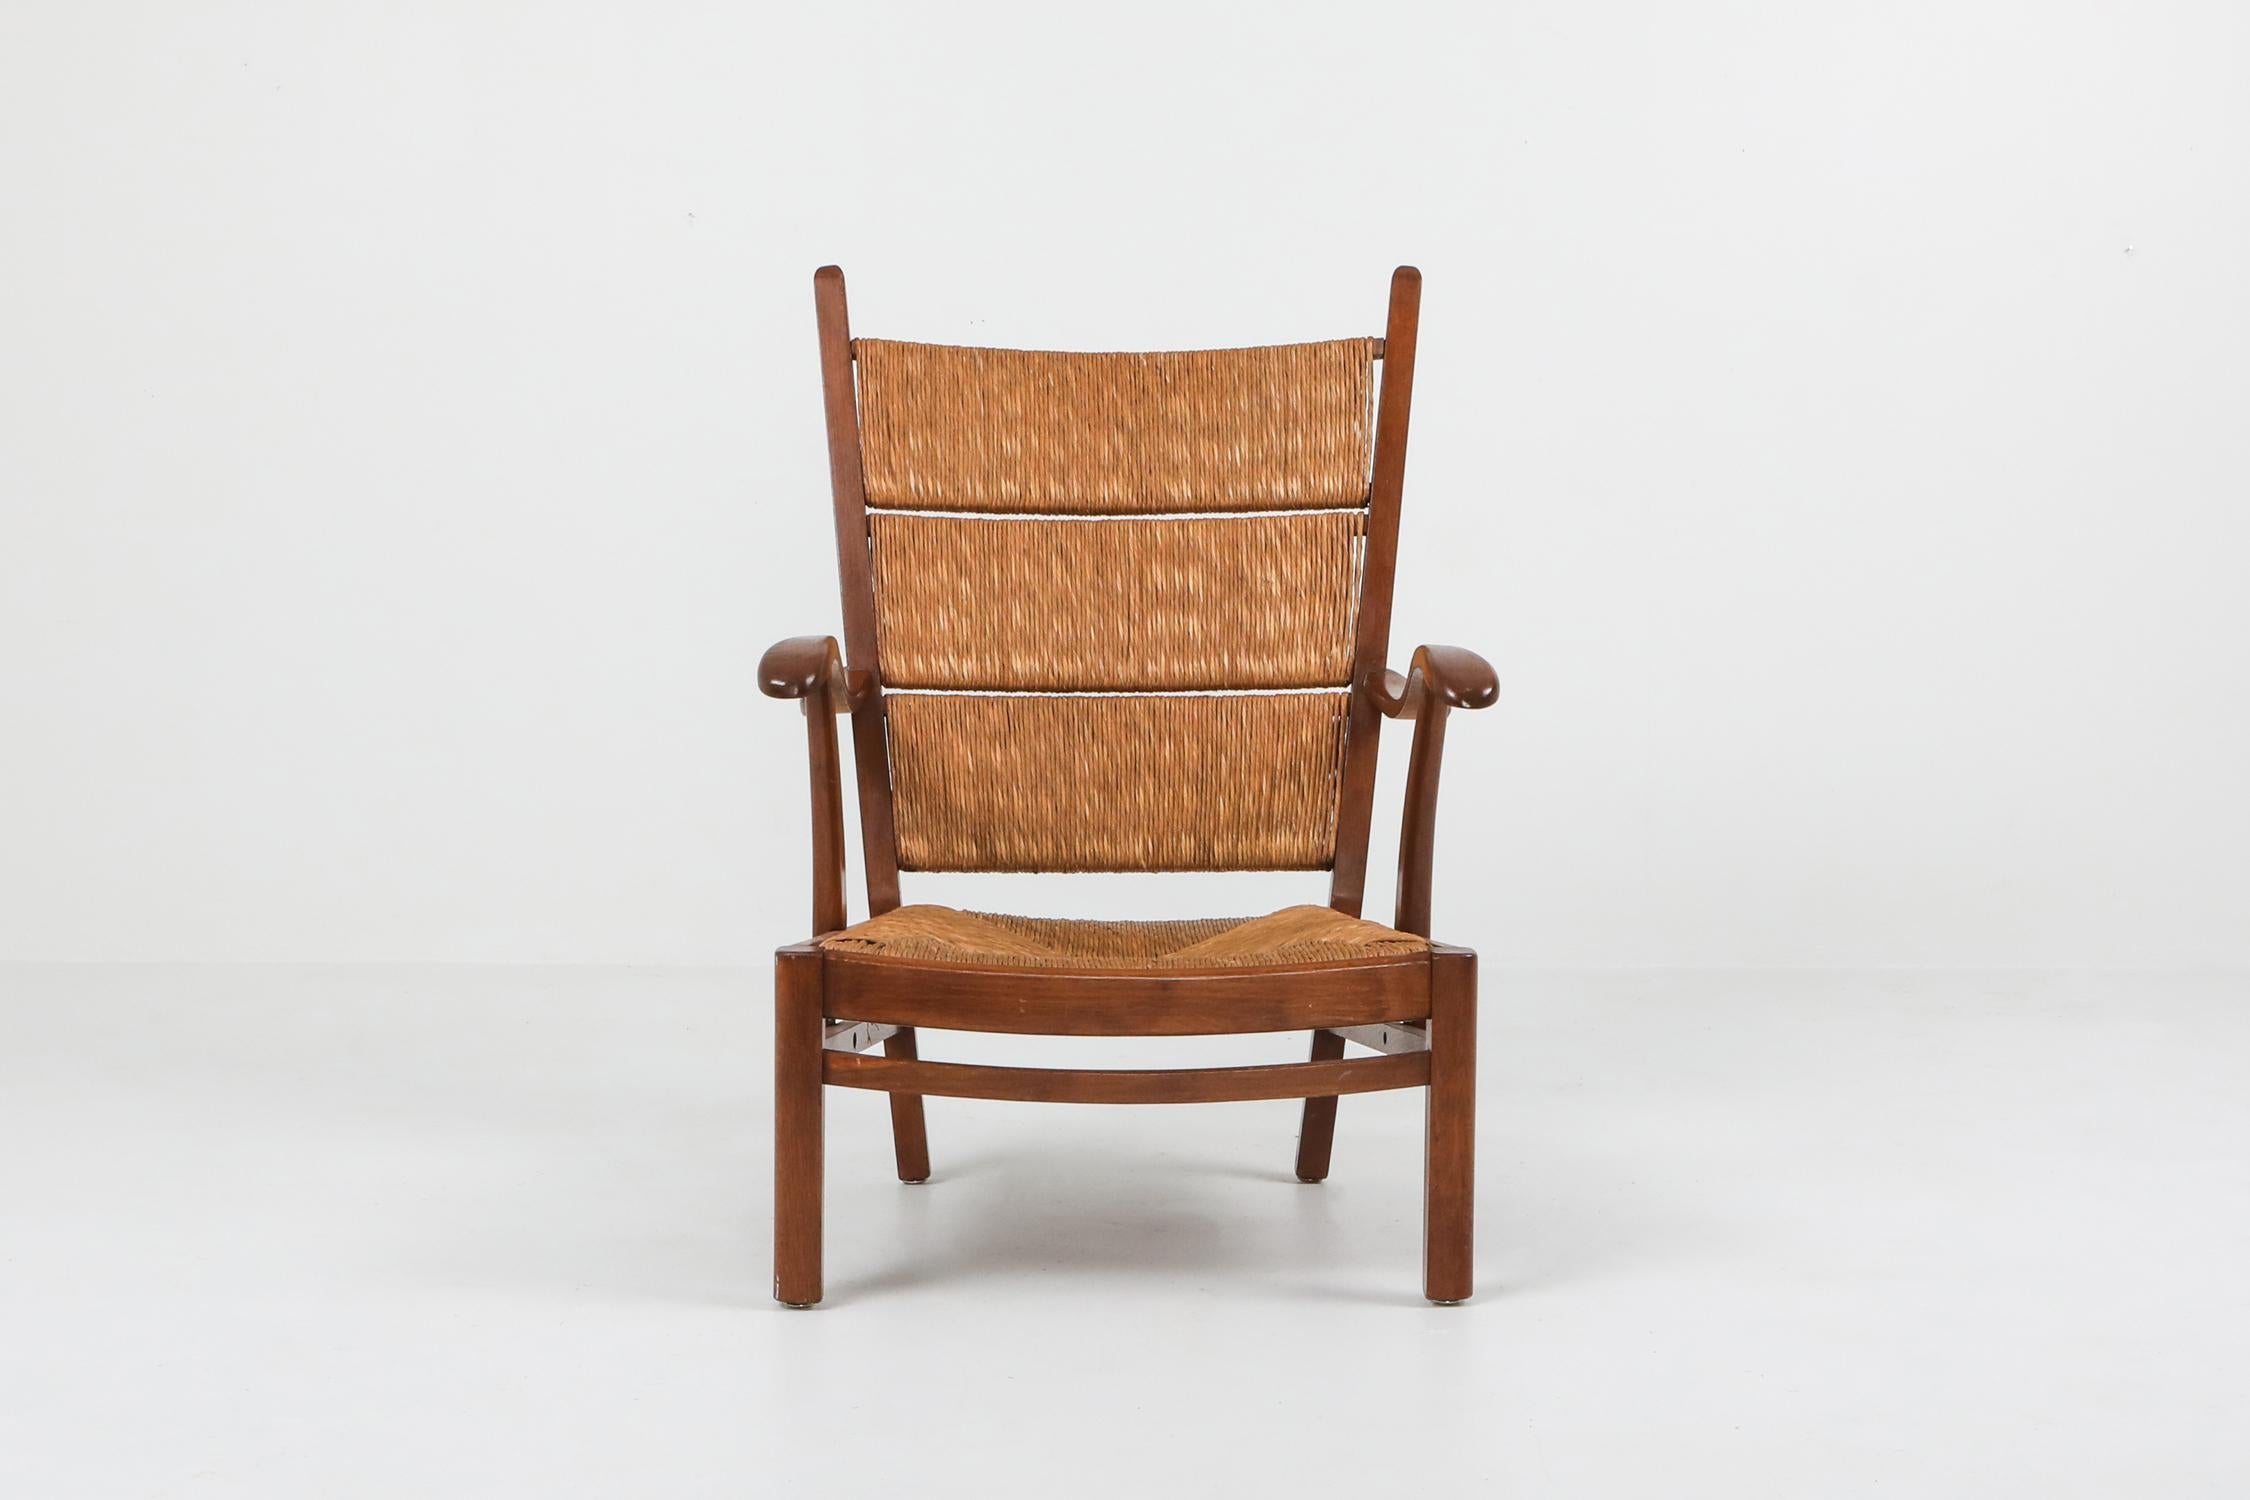 Dutch Bas Van Pelt attributed High Back Armchairs in Oak and Straw